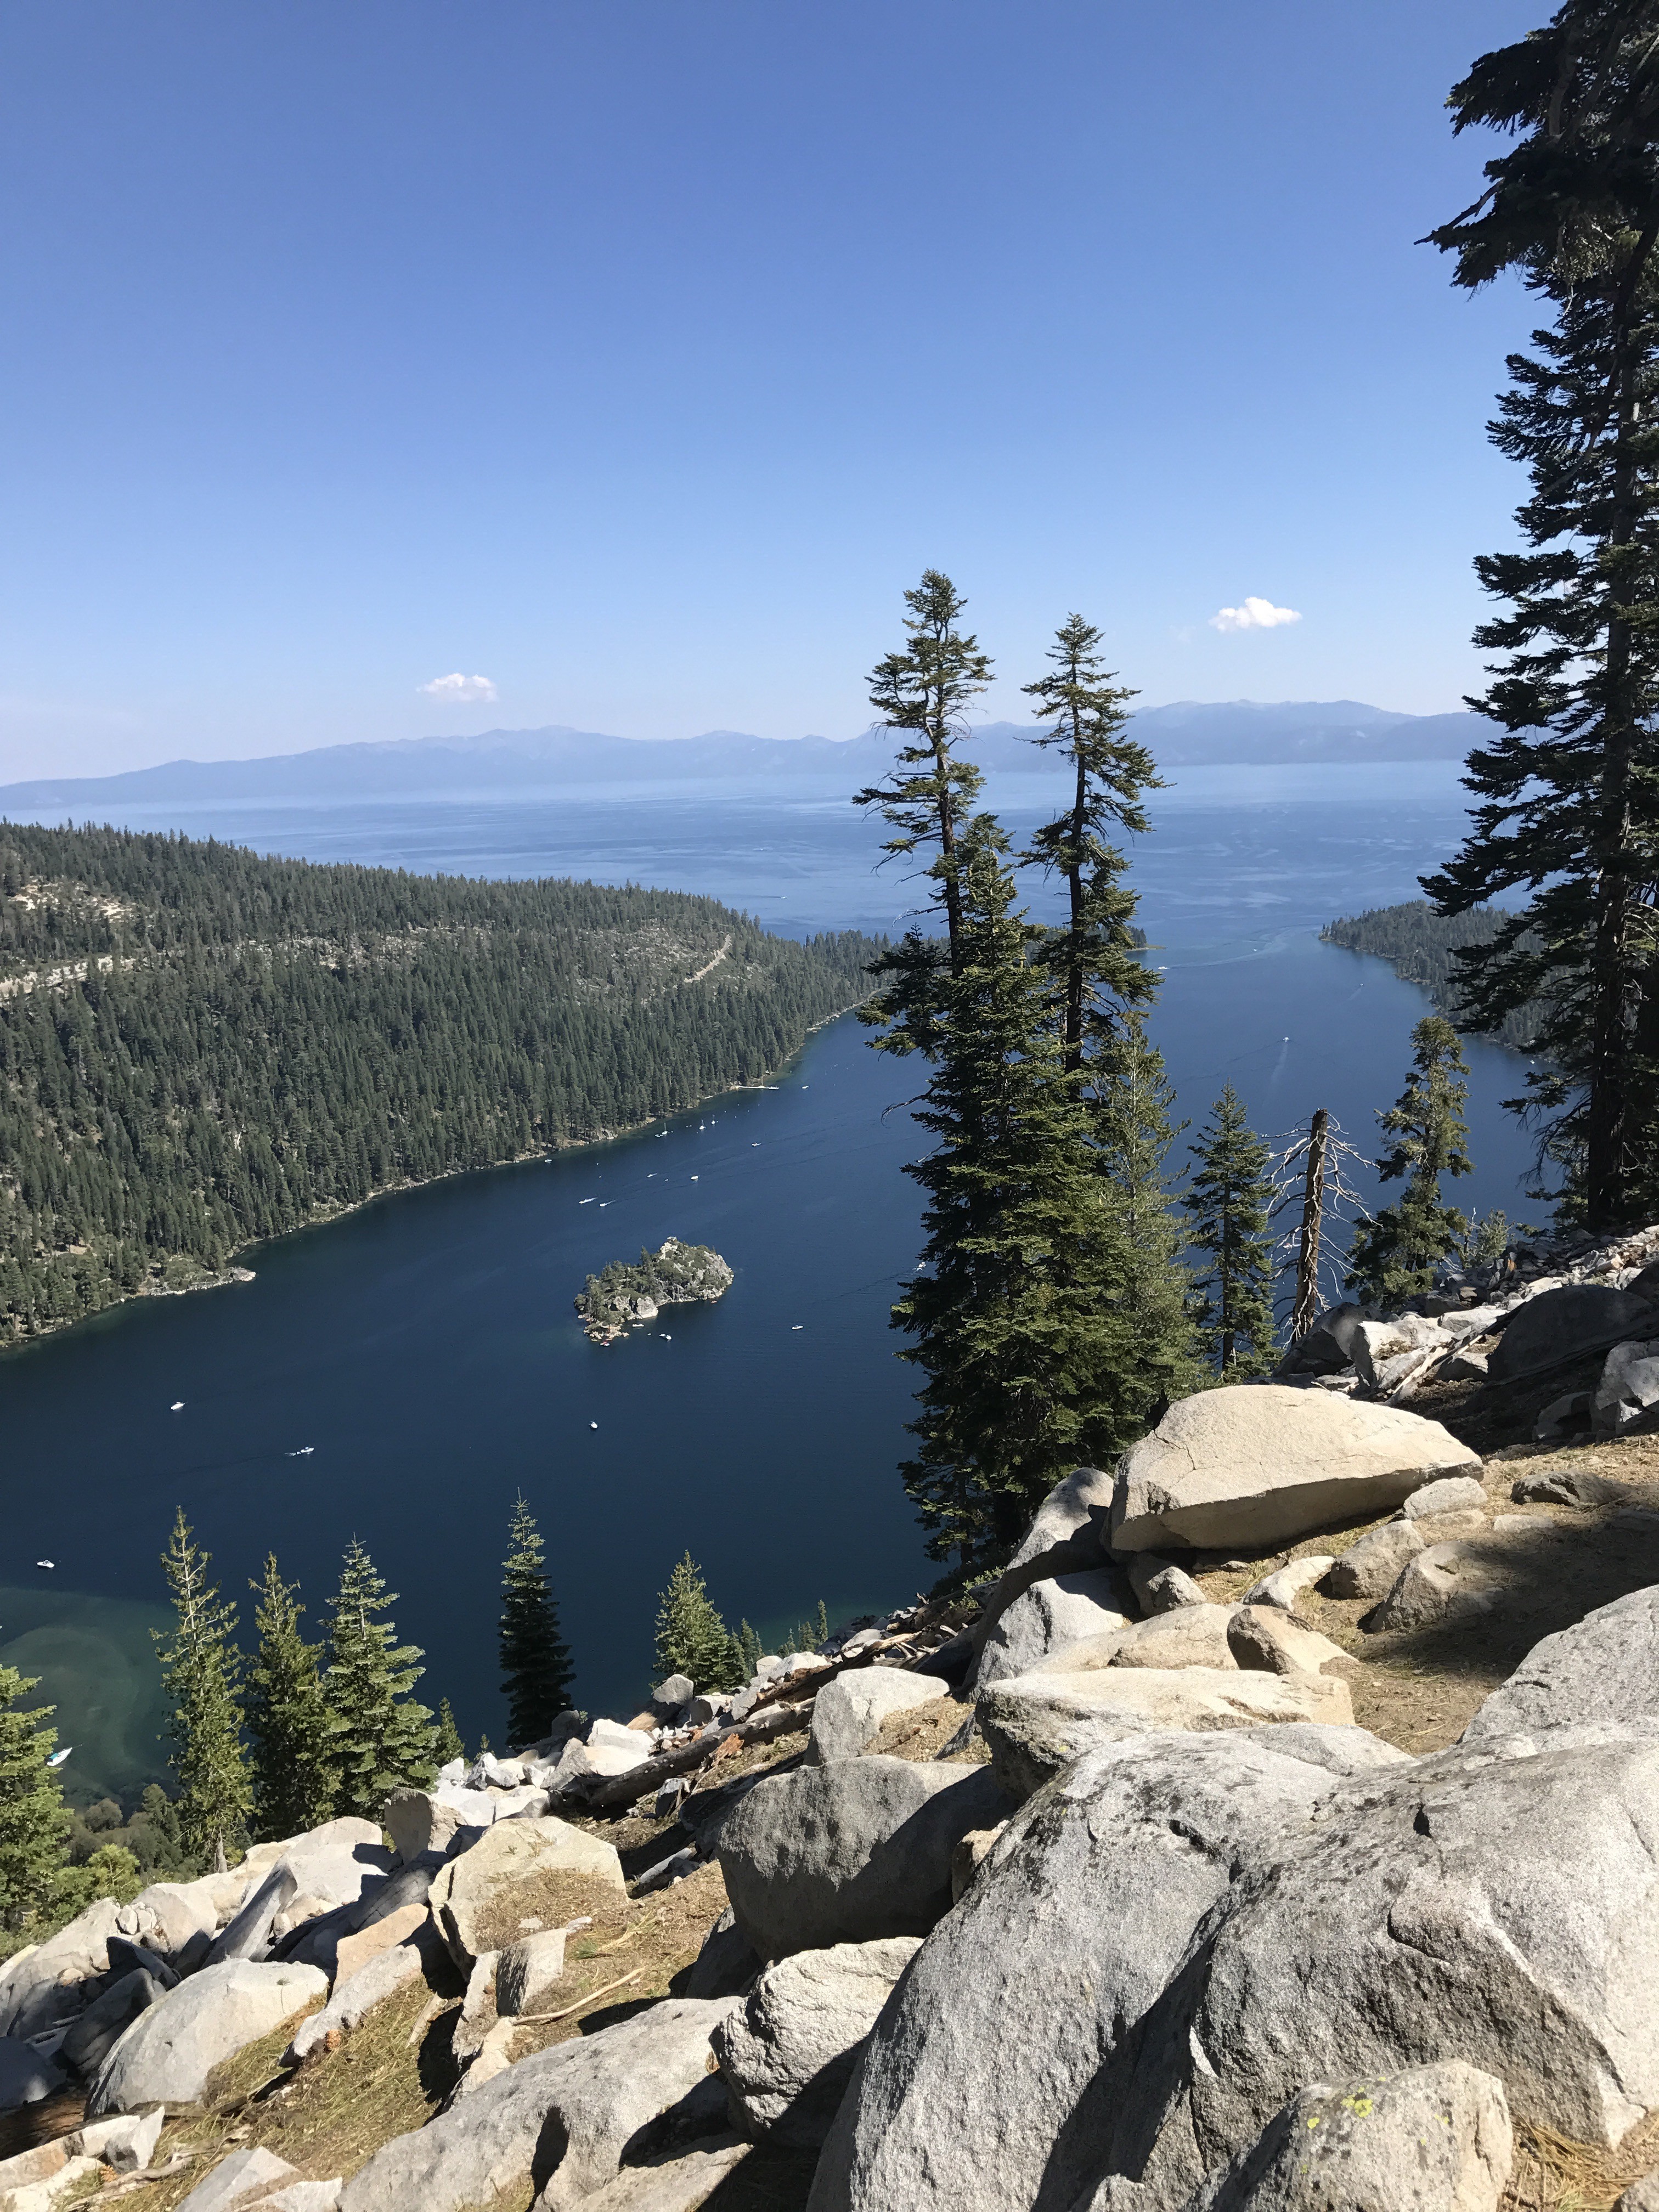 Lake Tahoe seems to go off forever in the distance beyond Emerald Bay. 8/24/2017